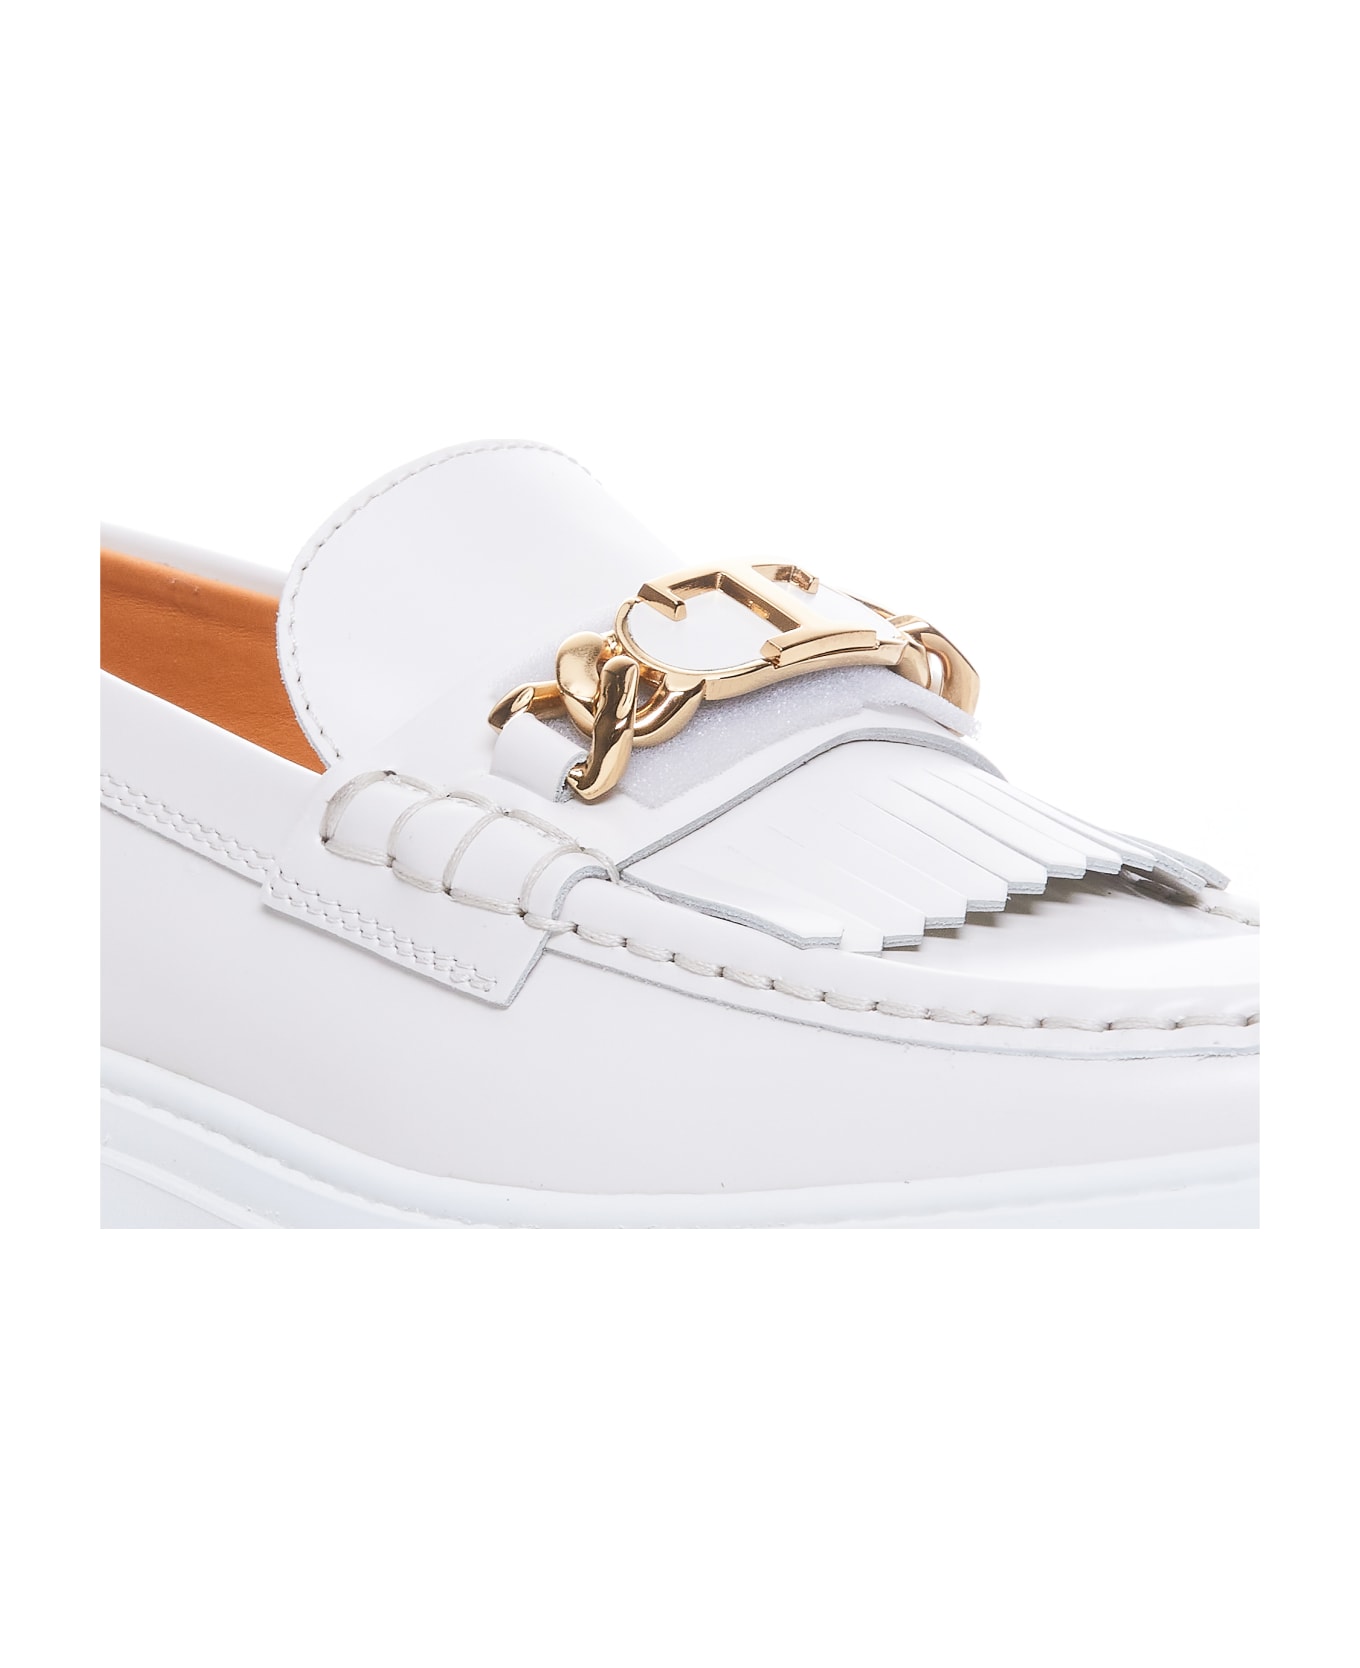 Tod's Leather Loafers - White